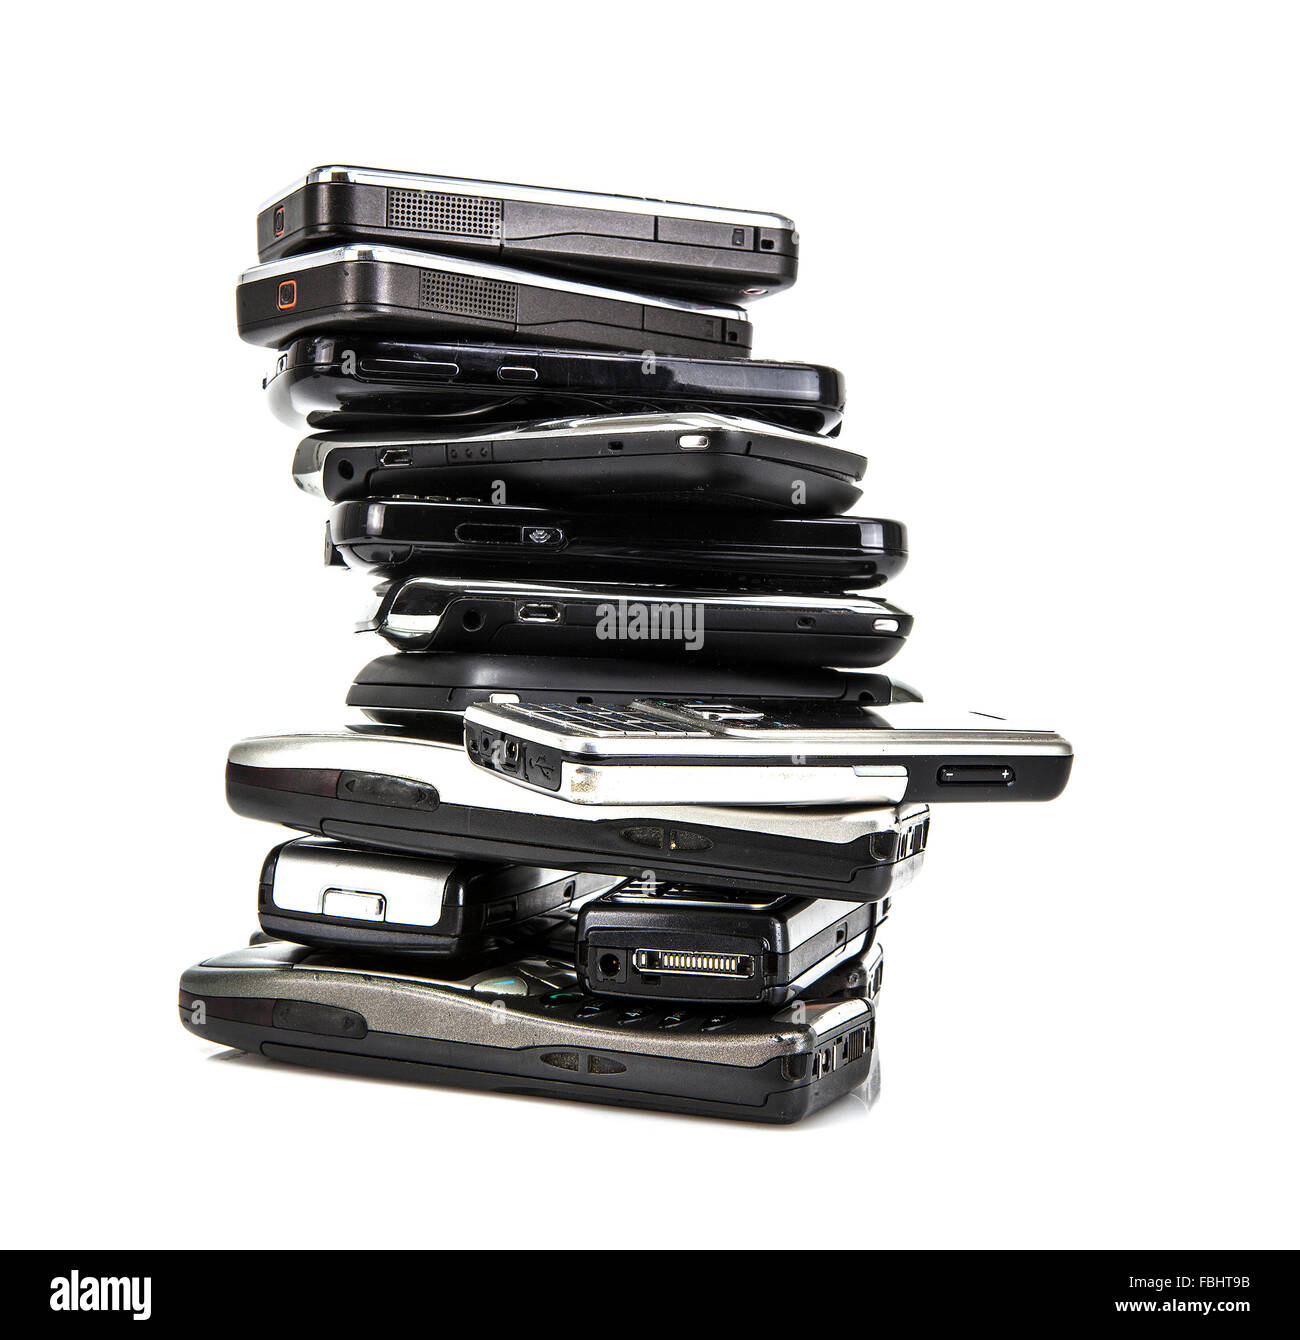 Pile of old mobile phones ready for recycling on a white background Stock Photo